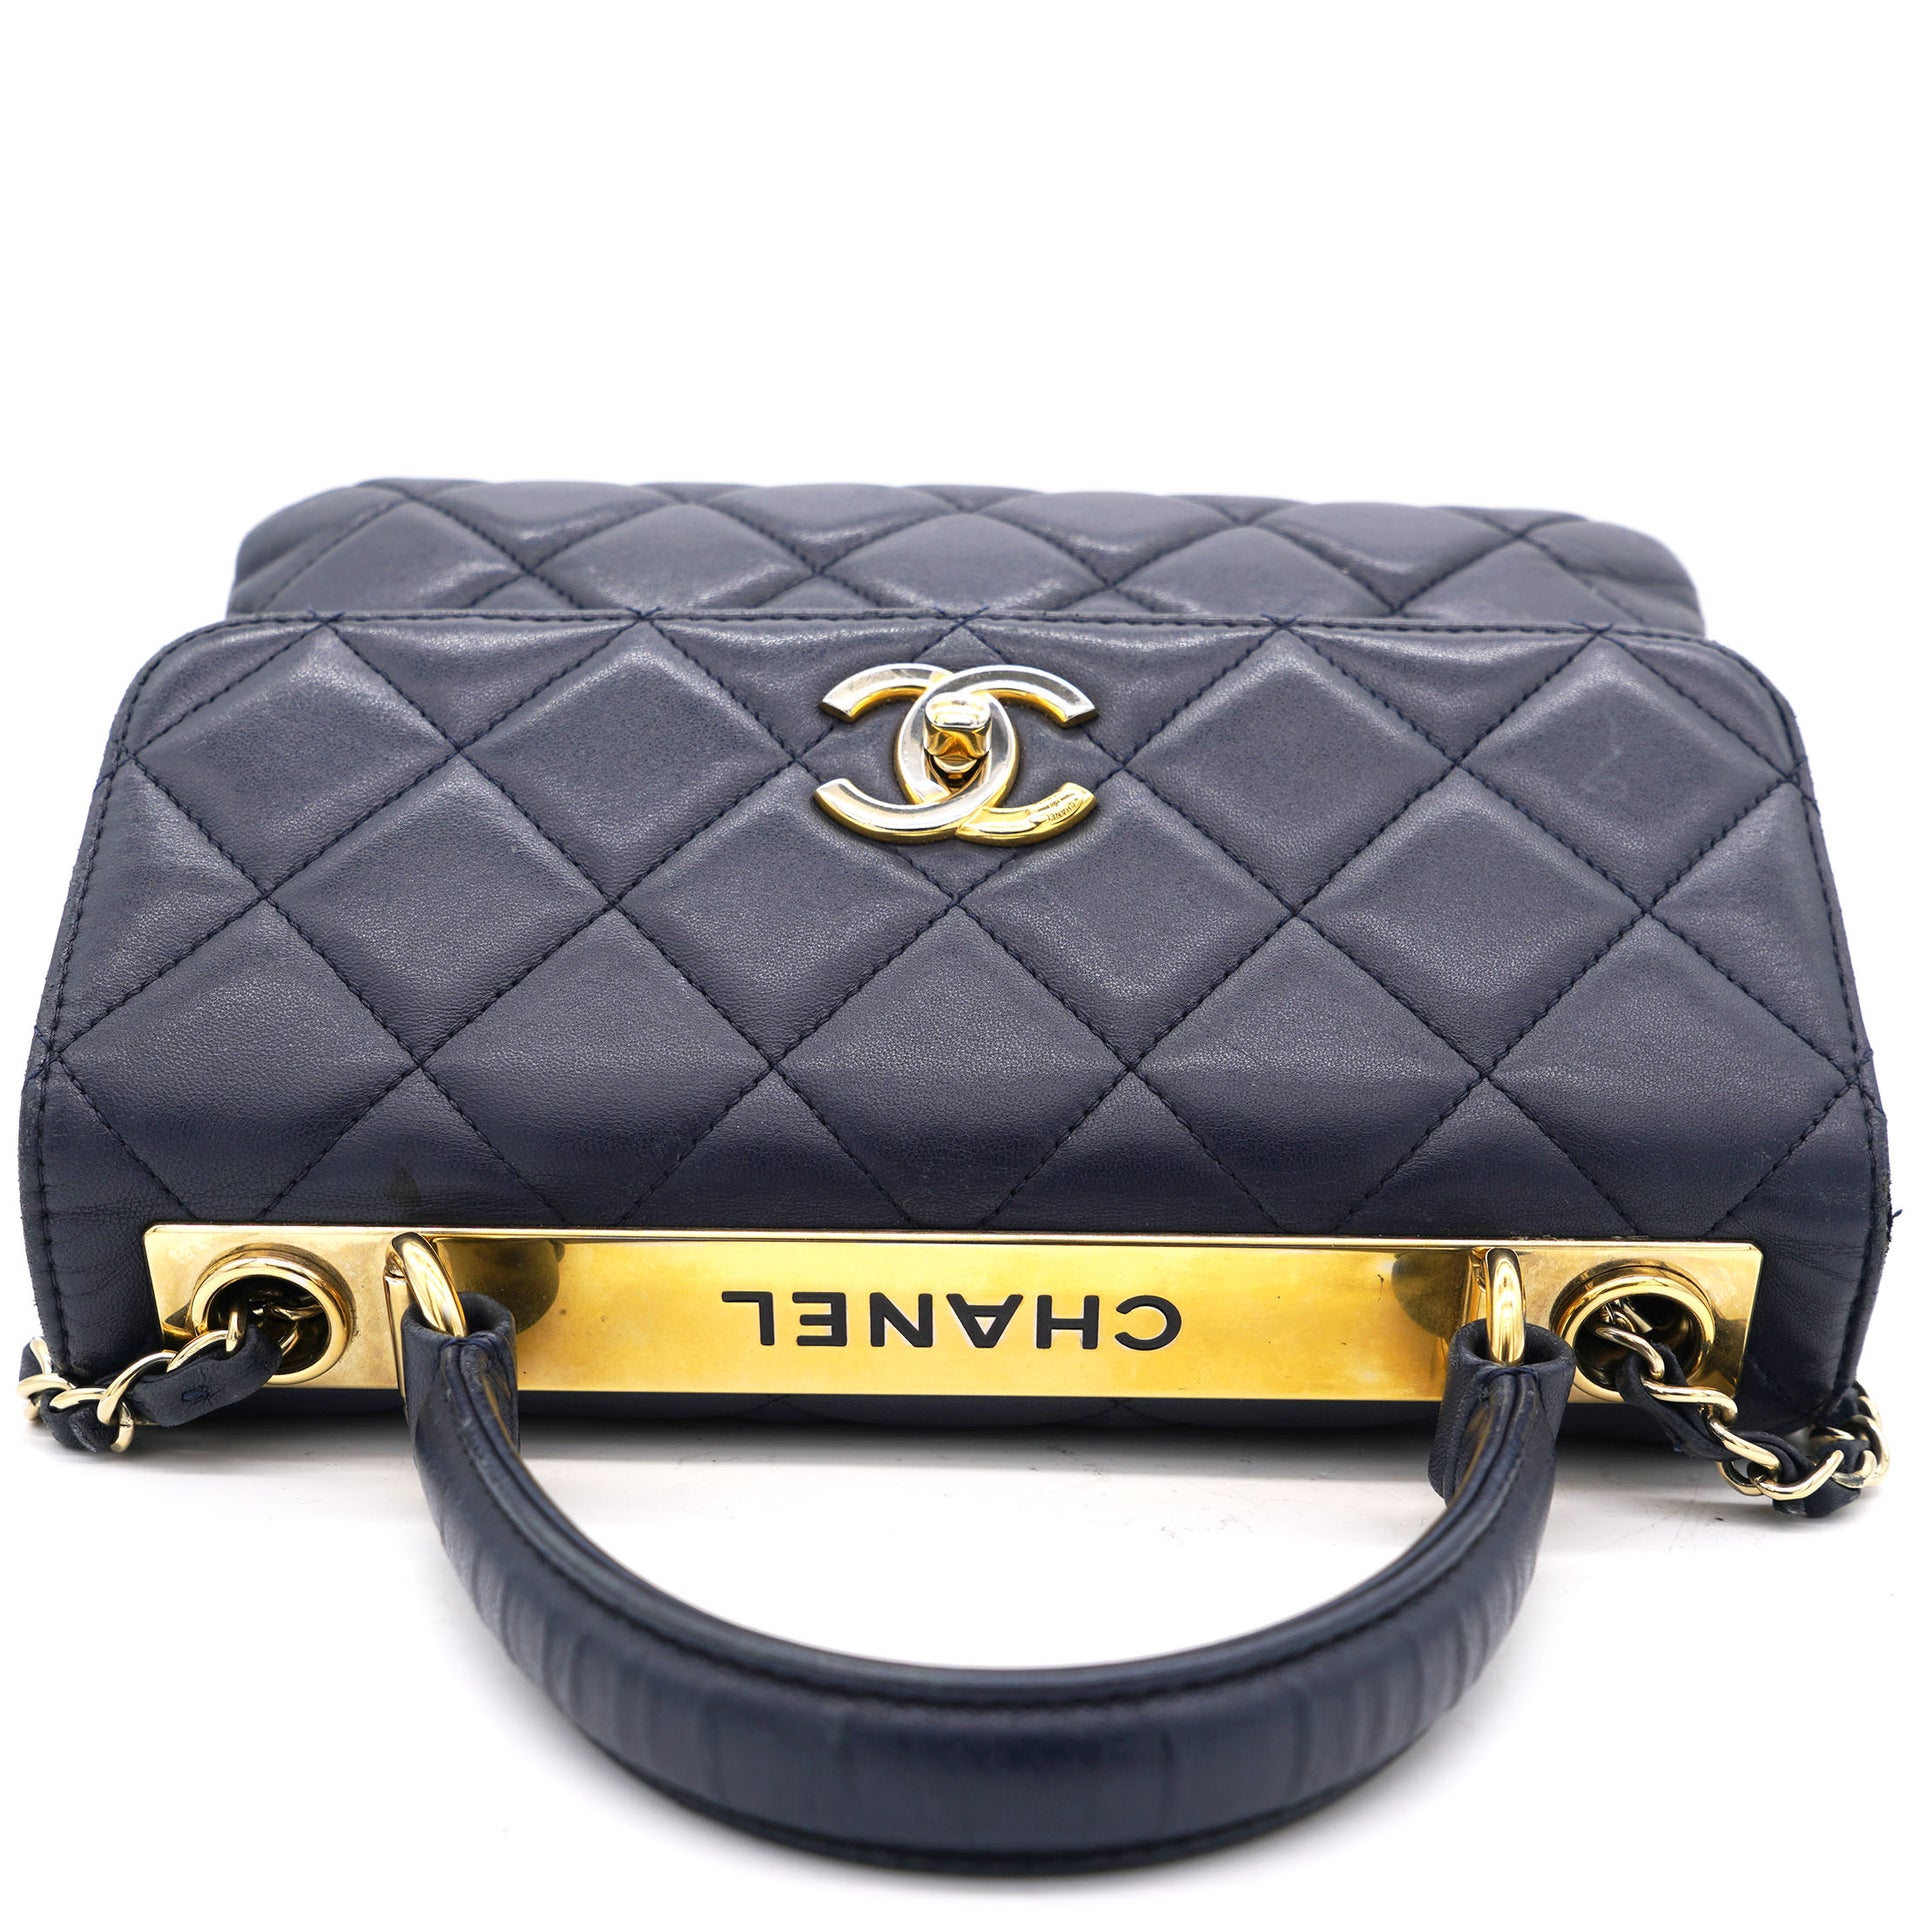 CHANEL Trendy CC Bowling Quilted Leather Shoulder Bag Beige